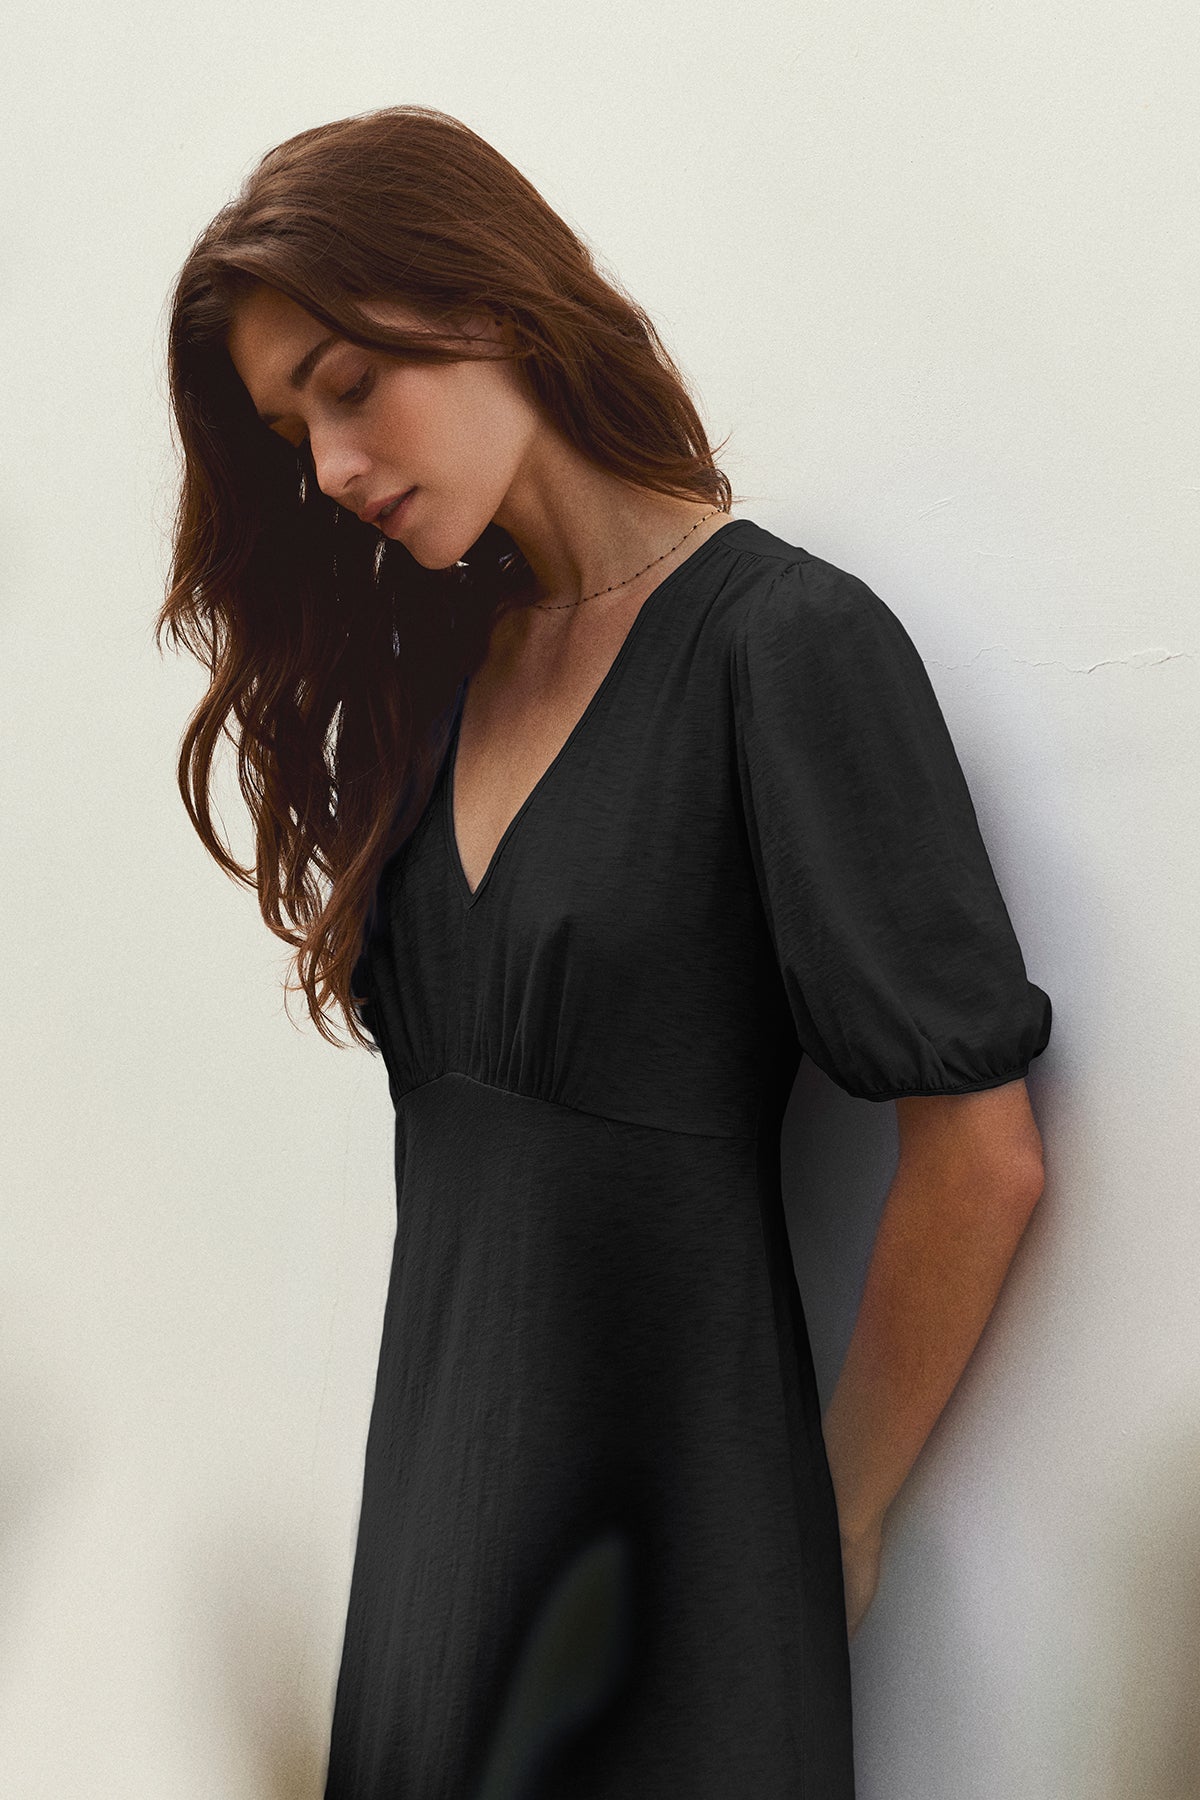 A woman with long brown hair wearing a black PARKER COTTON SLUB MIDI DRESS by Velvet by Graham & Spencer stands against a plain white wall, looking downwards.-37185422000321